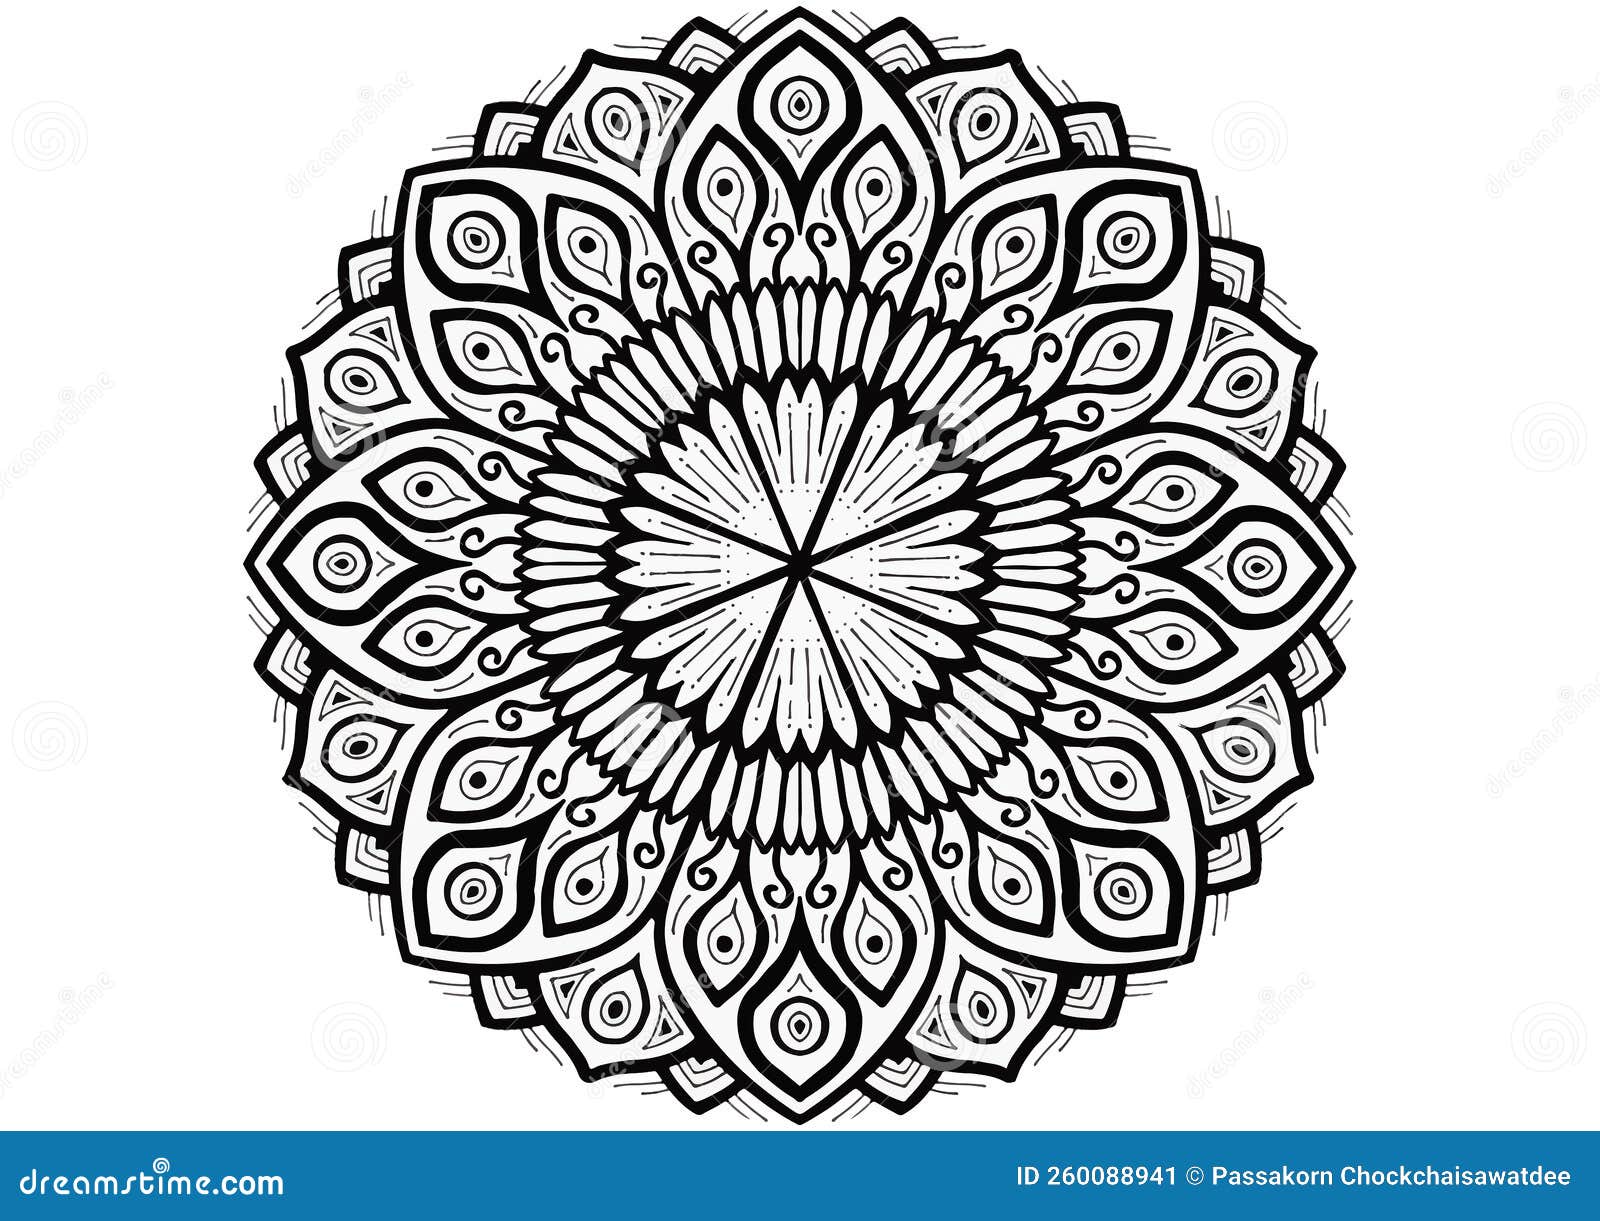 Premium Vector  Mantra mandala, the meditation art for adults to coloring  drawing with hands by art by uncle 102